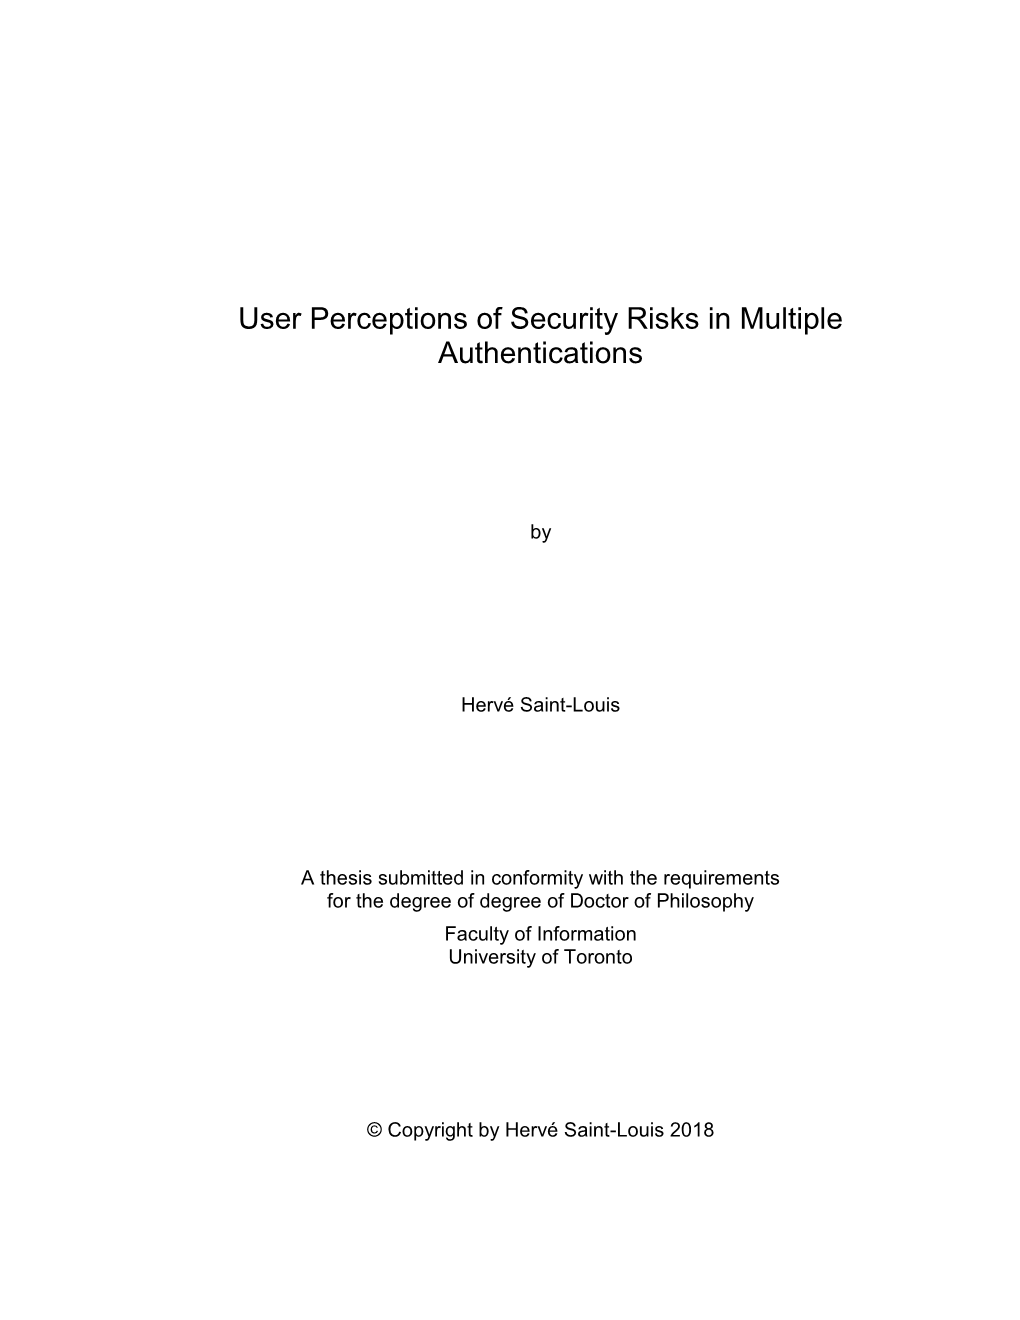 User Perceptions of Security Risks in Multiple Authentications